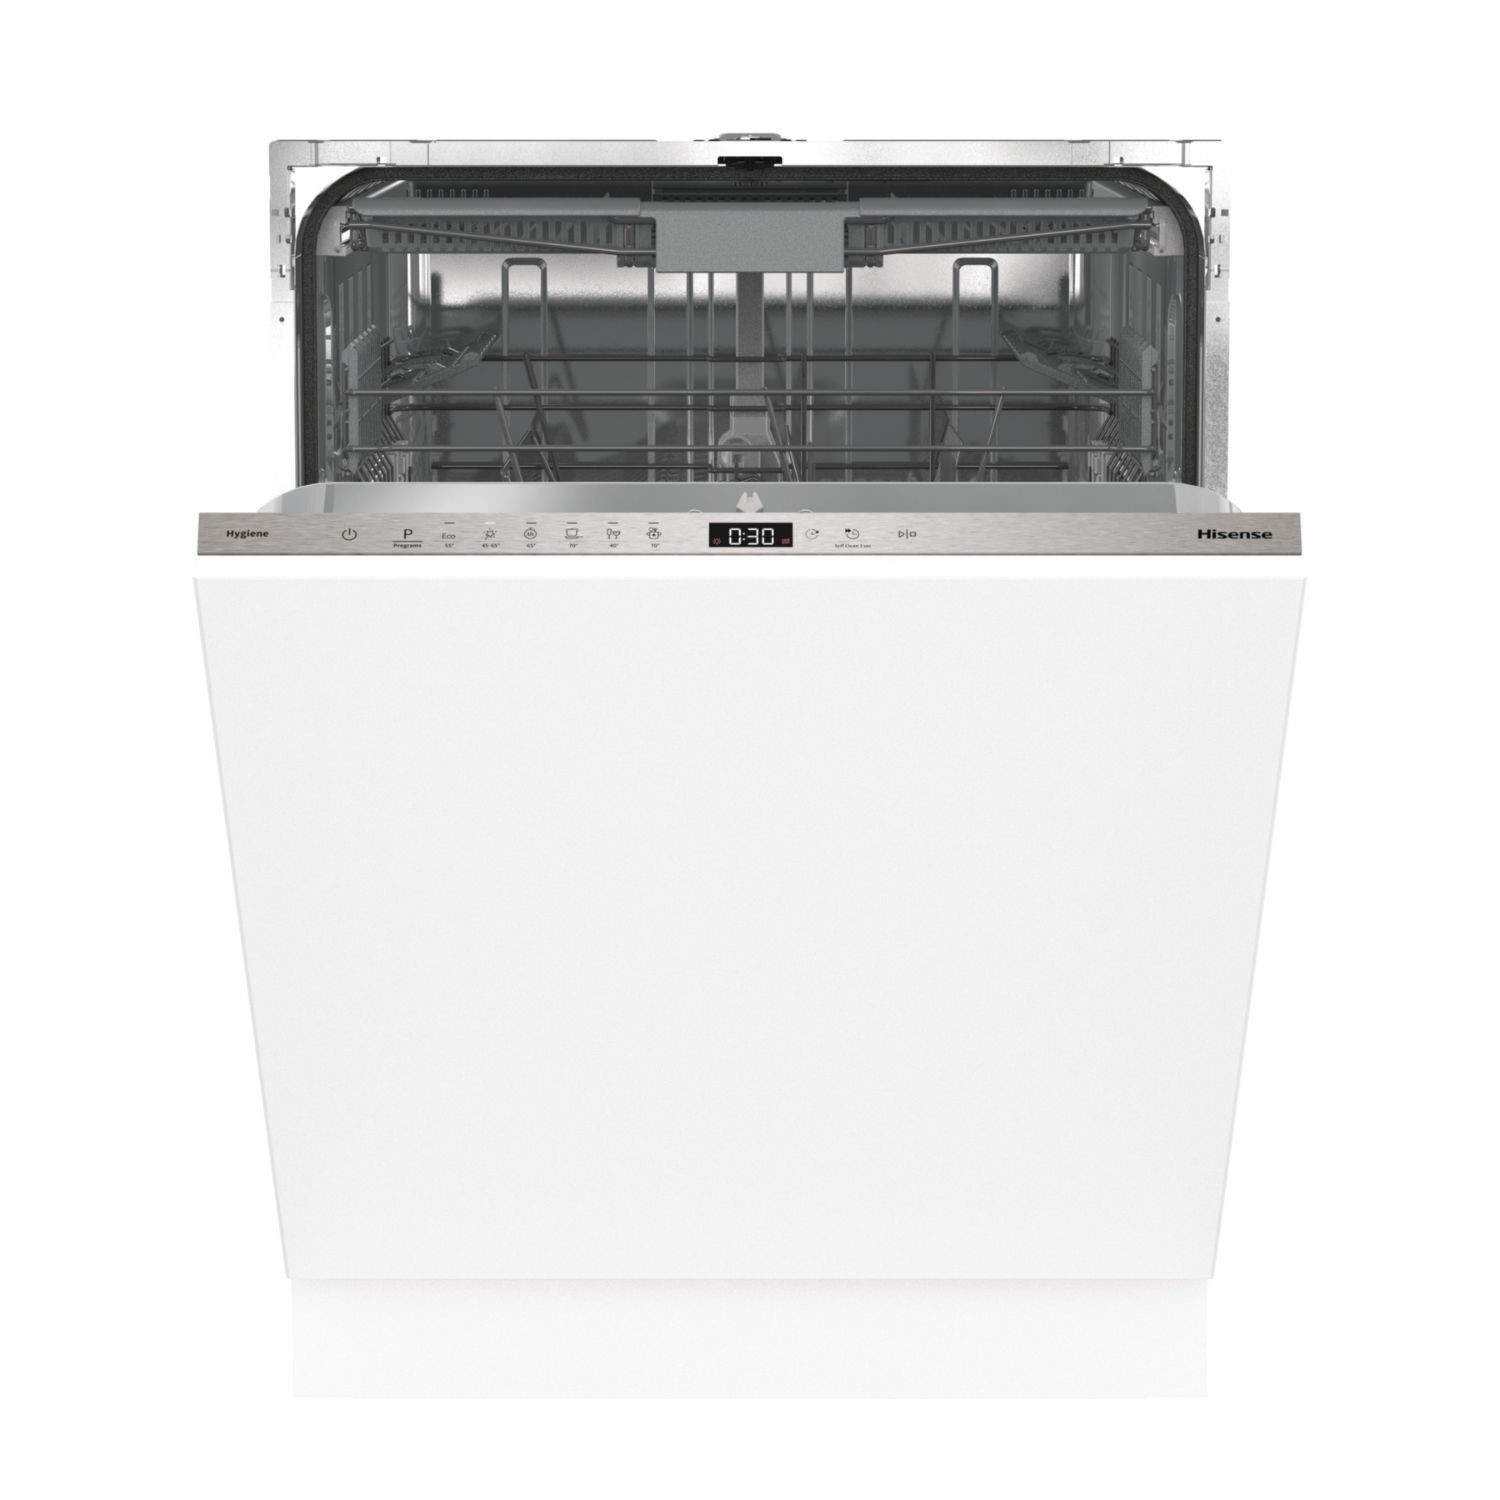 Photos - Other for Computer Hisense 16 Place Settings Fully Integrated Dishwasher 20011933 